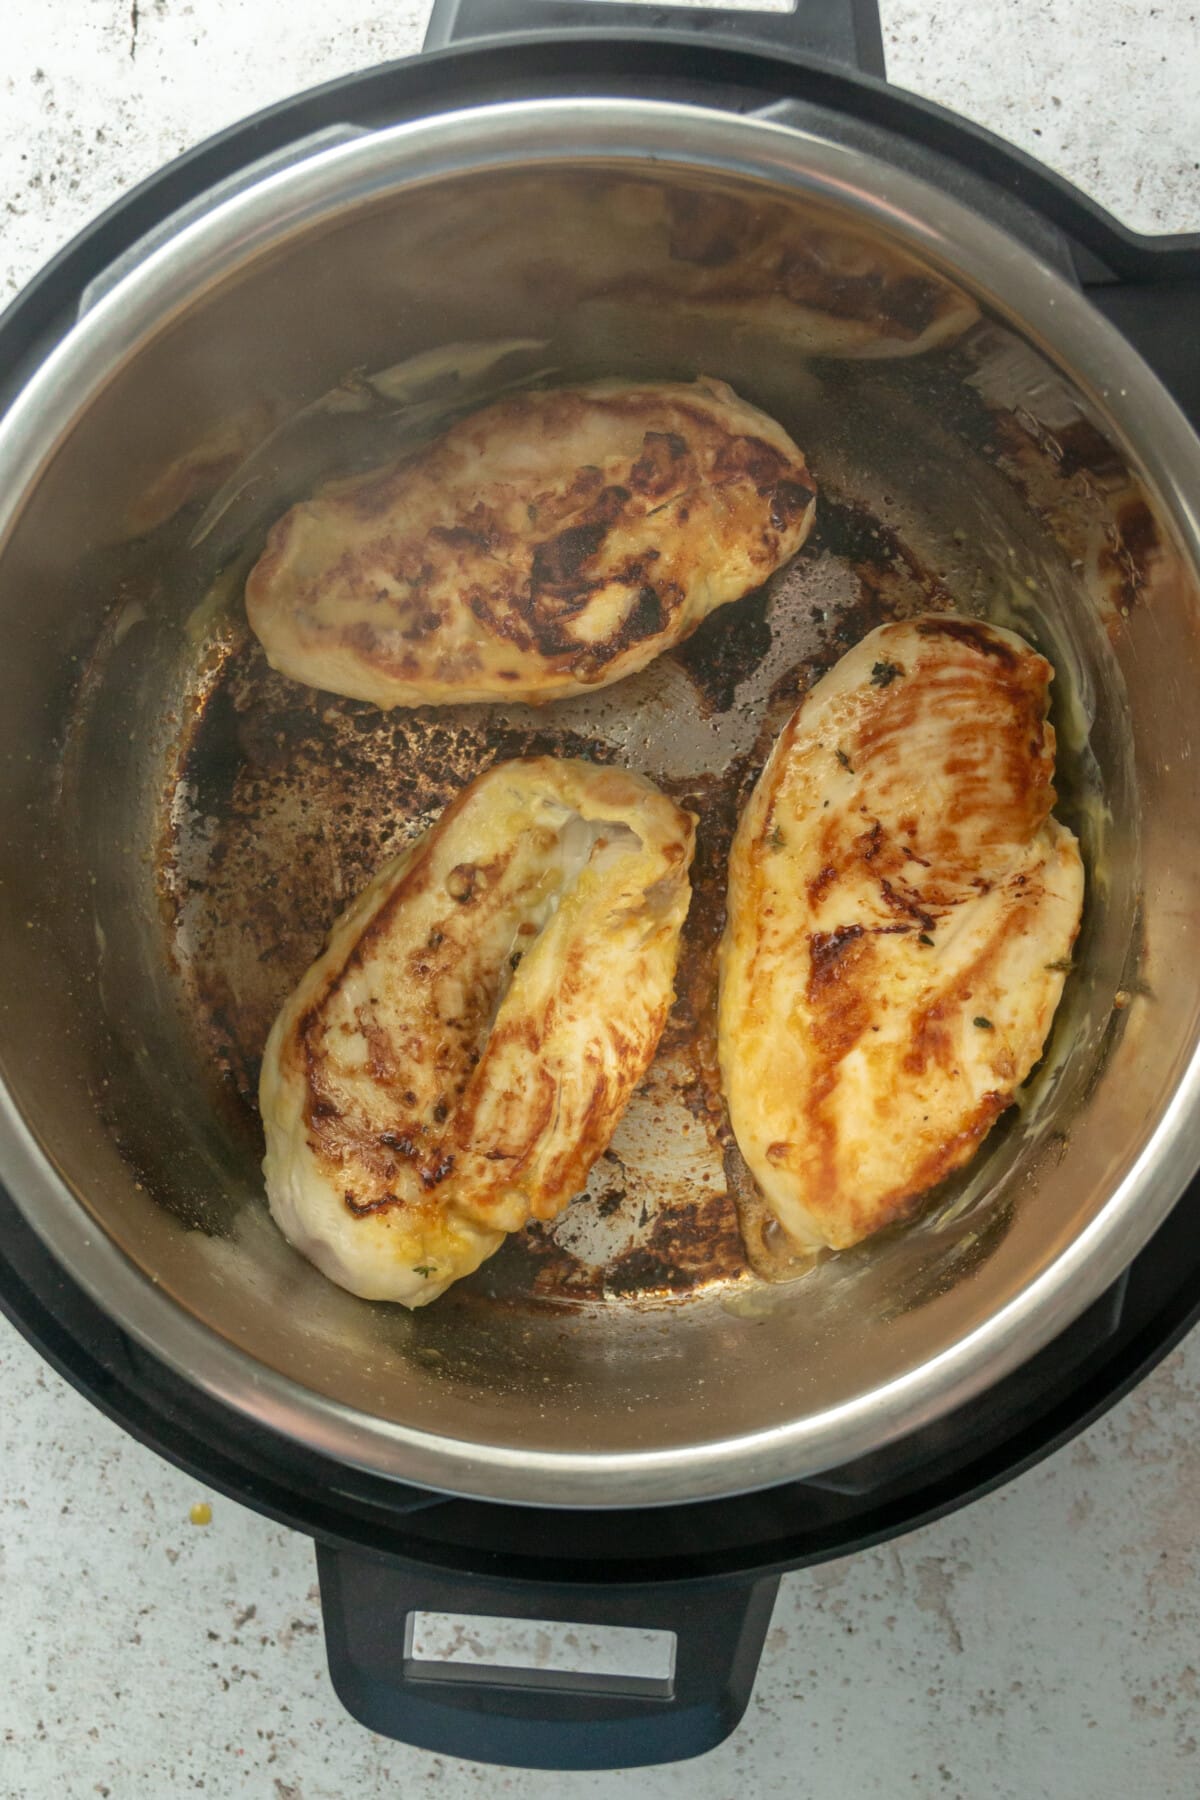 Chicken breast fillets are cooked and golden in an instant pot on a light grey colored surface.